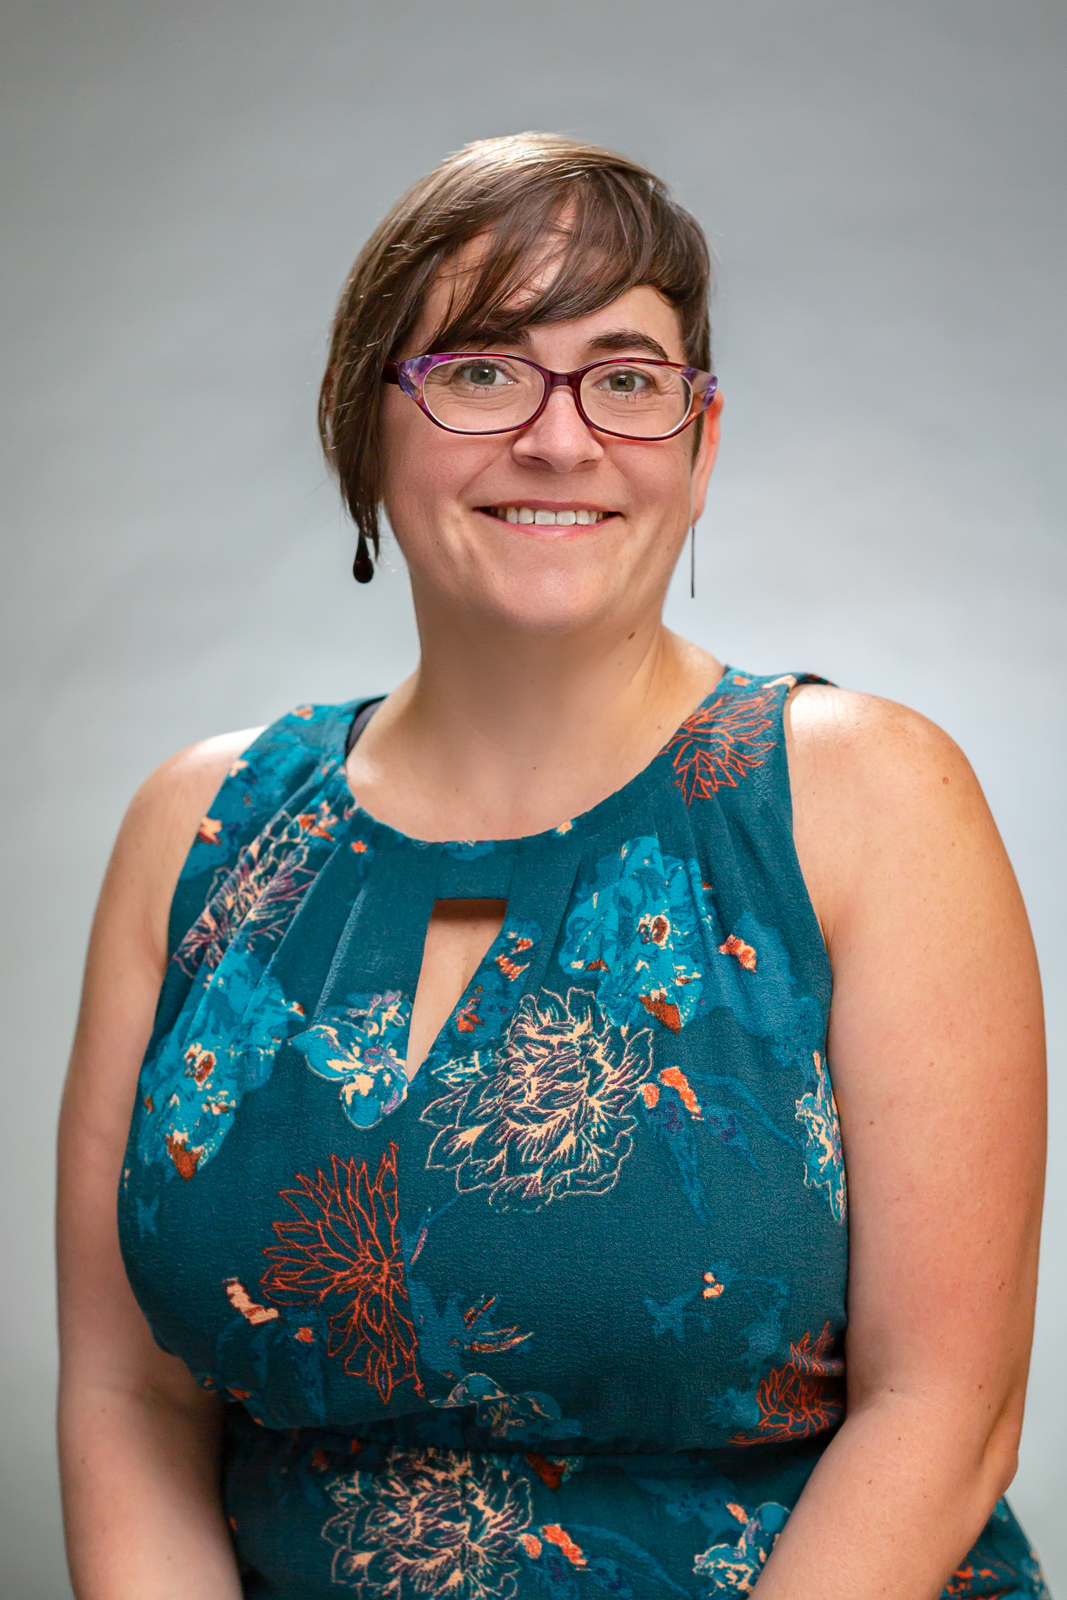 Dr. Kendra Seaman, assistant professor of psychology and cognitive neuroscience